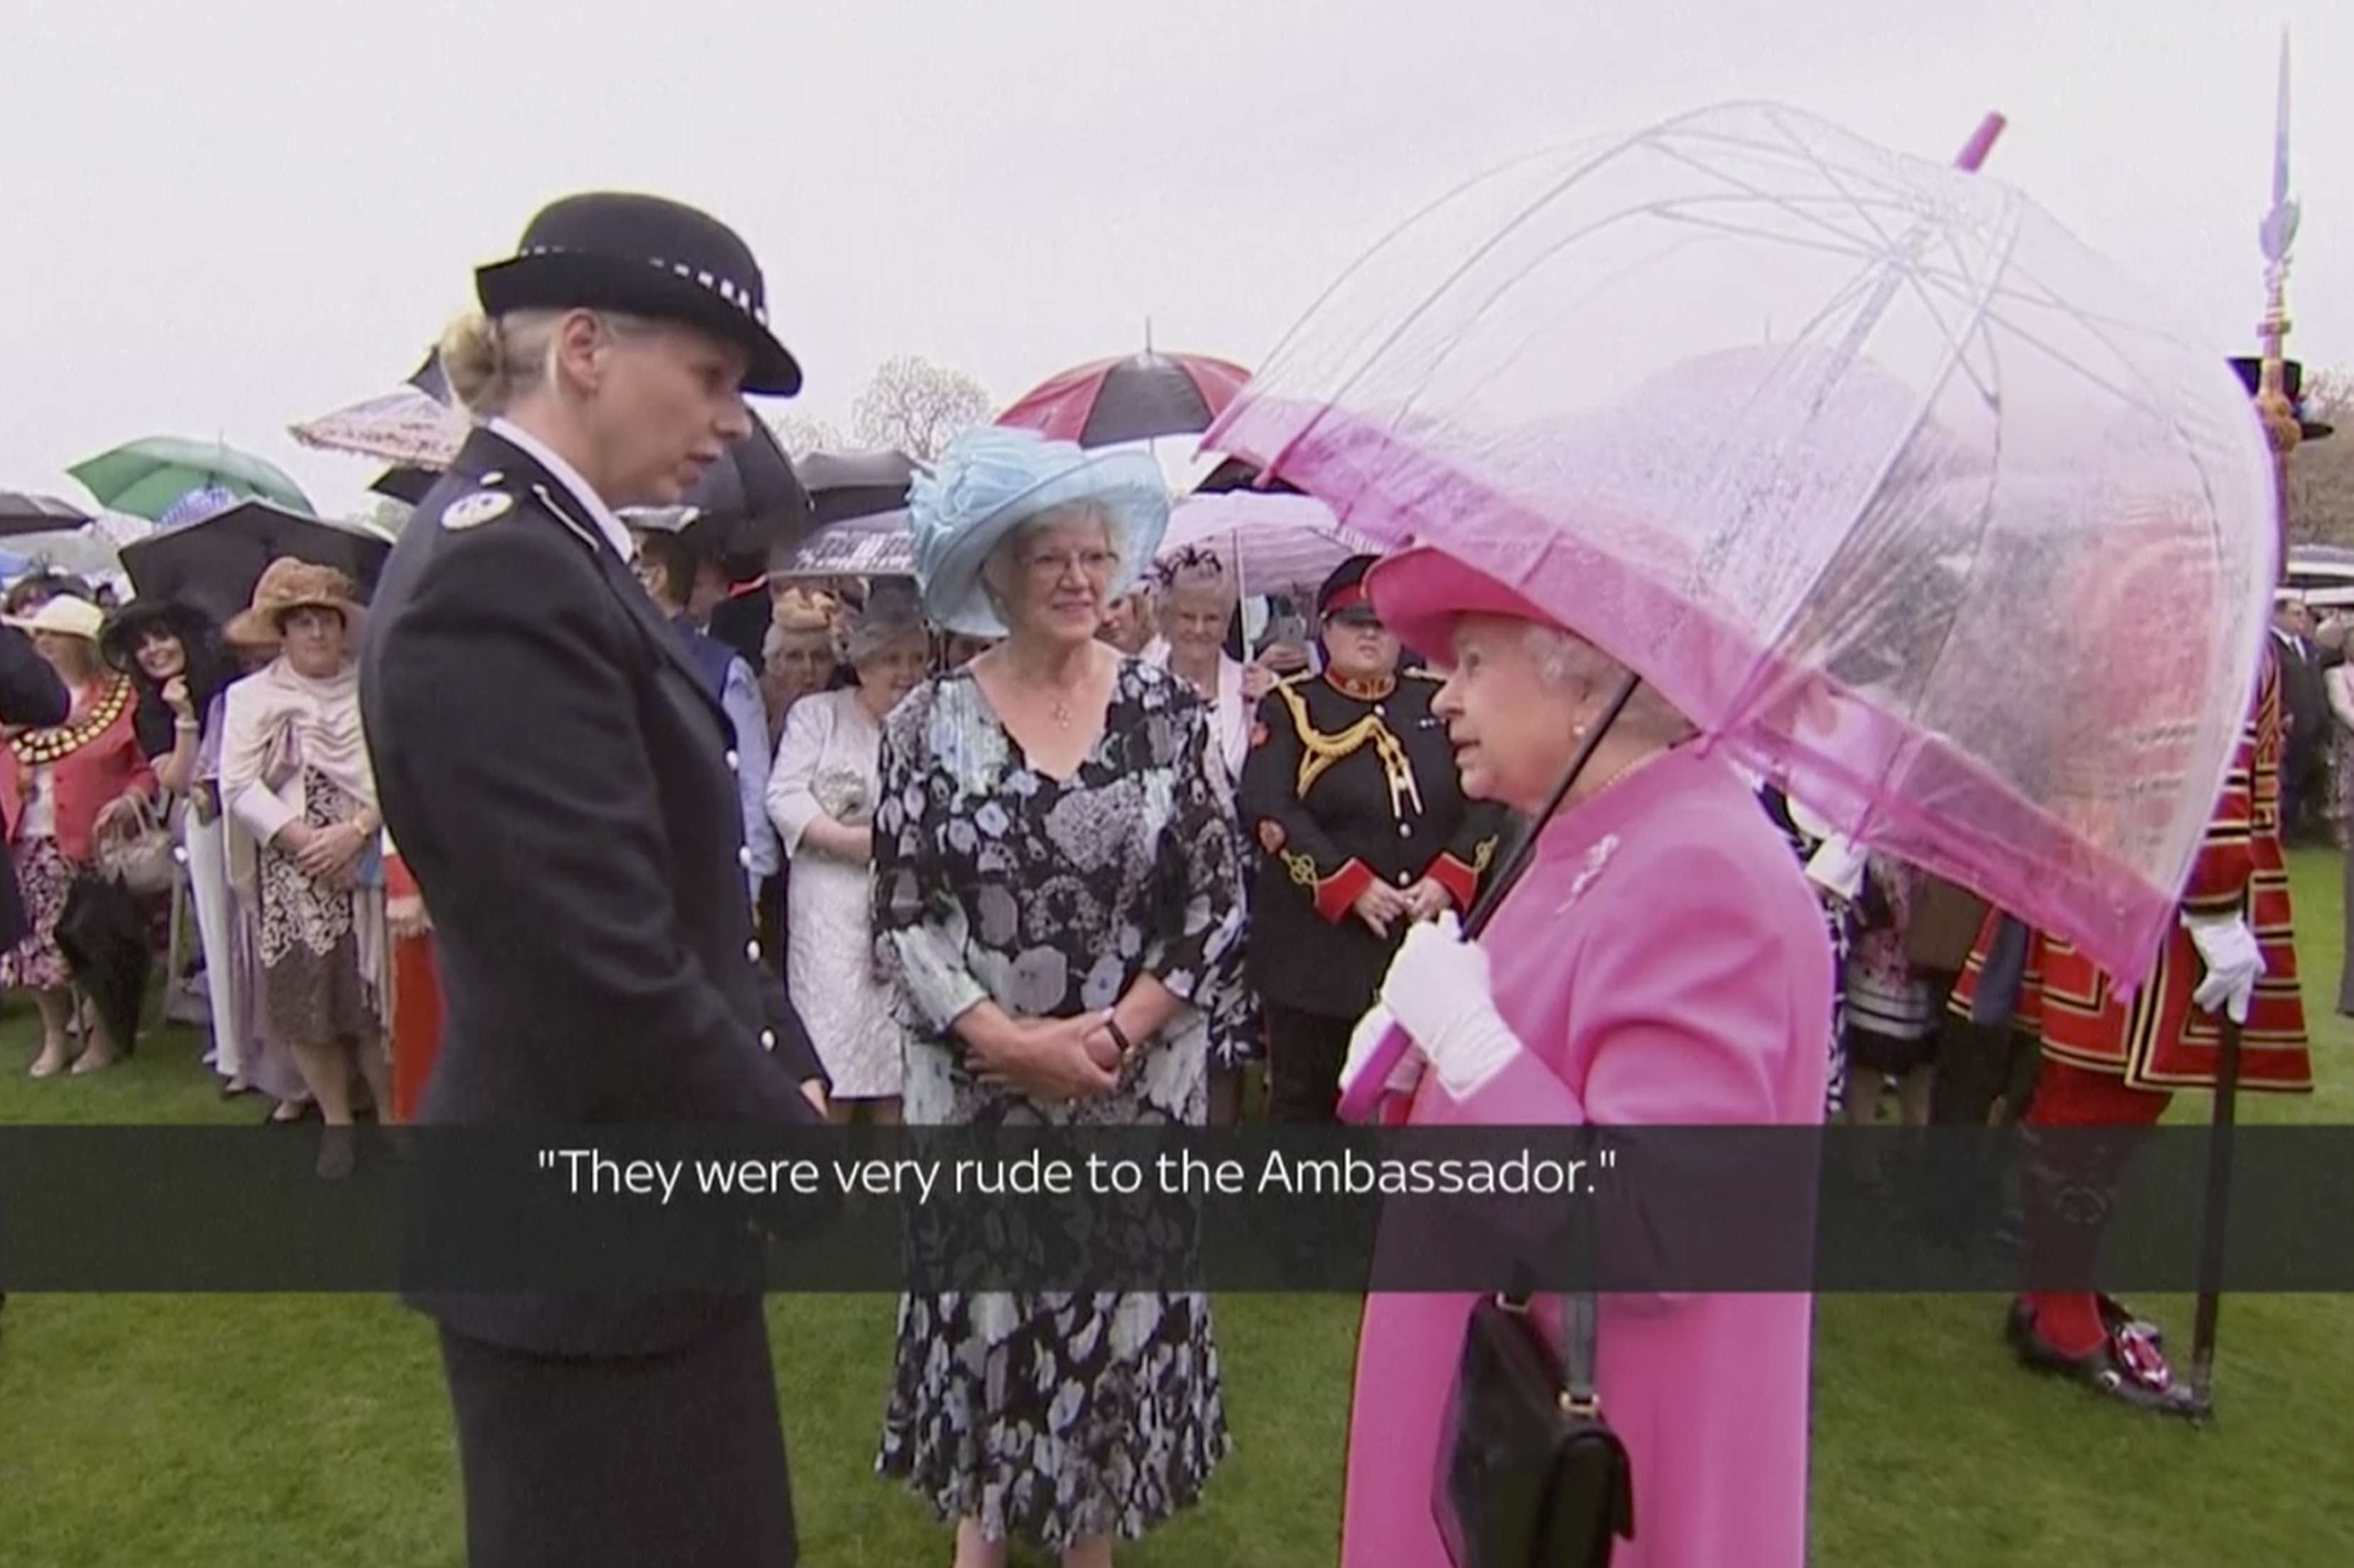 An image from the video which shows the queen complaining about the rudeness of some officials during President Xi Jinping’s trip to Britain last year. Photo: Associated Press